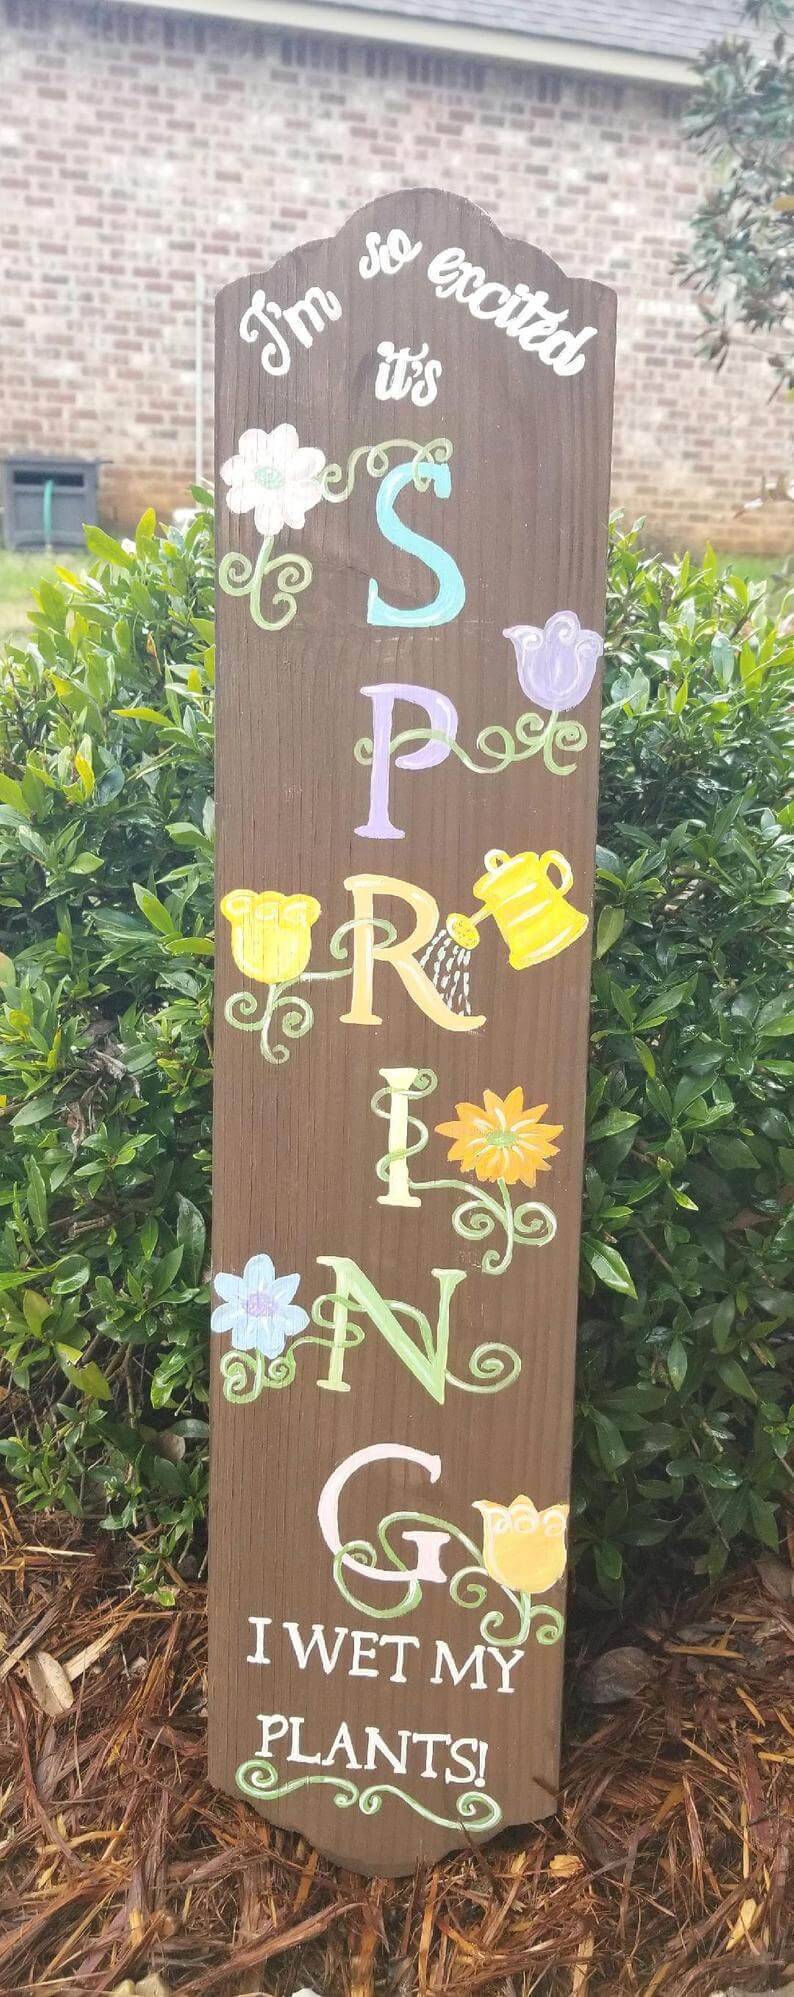 A Unique and Hilarious Spring Welcome Sign